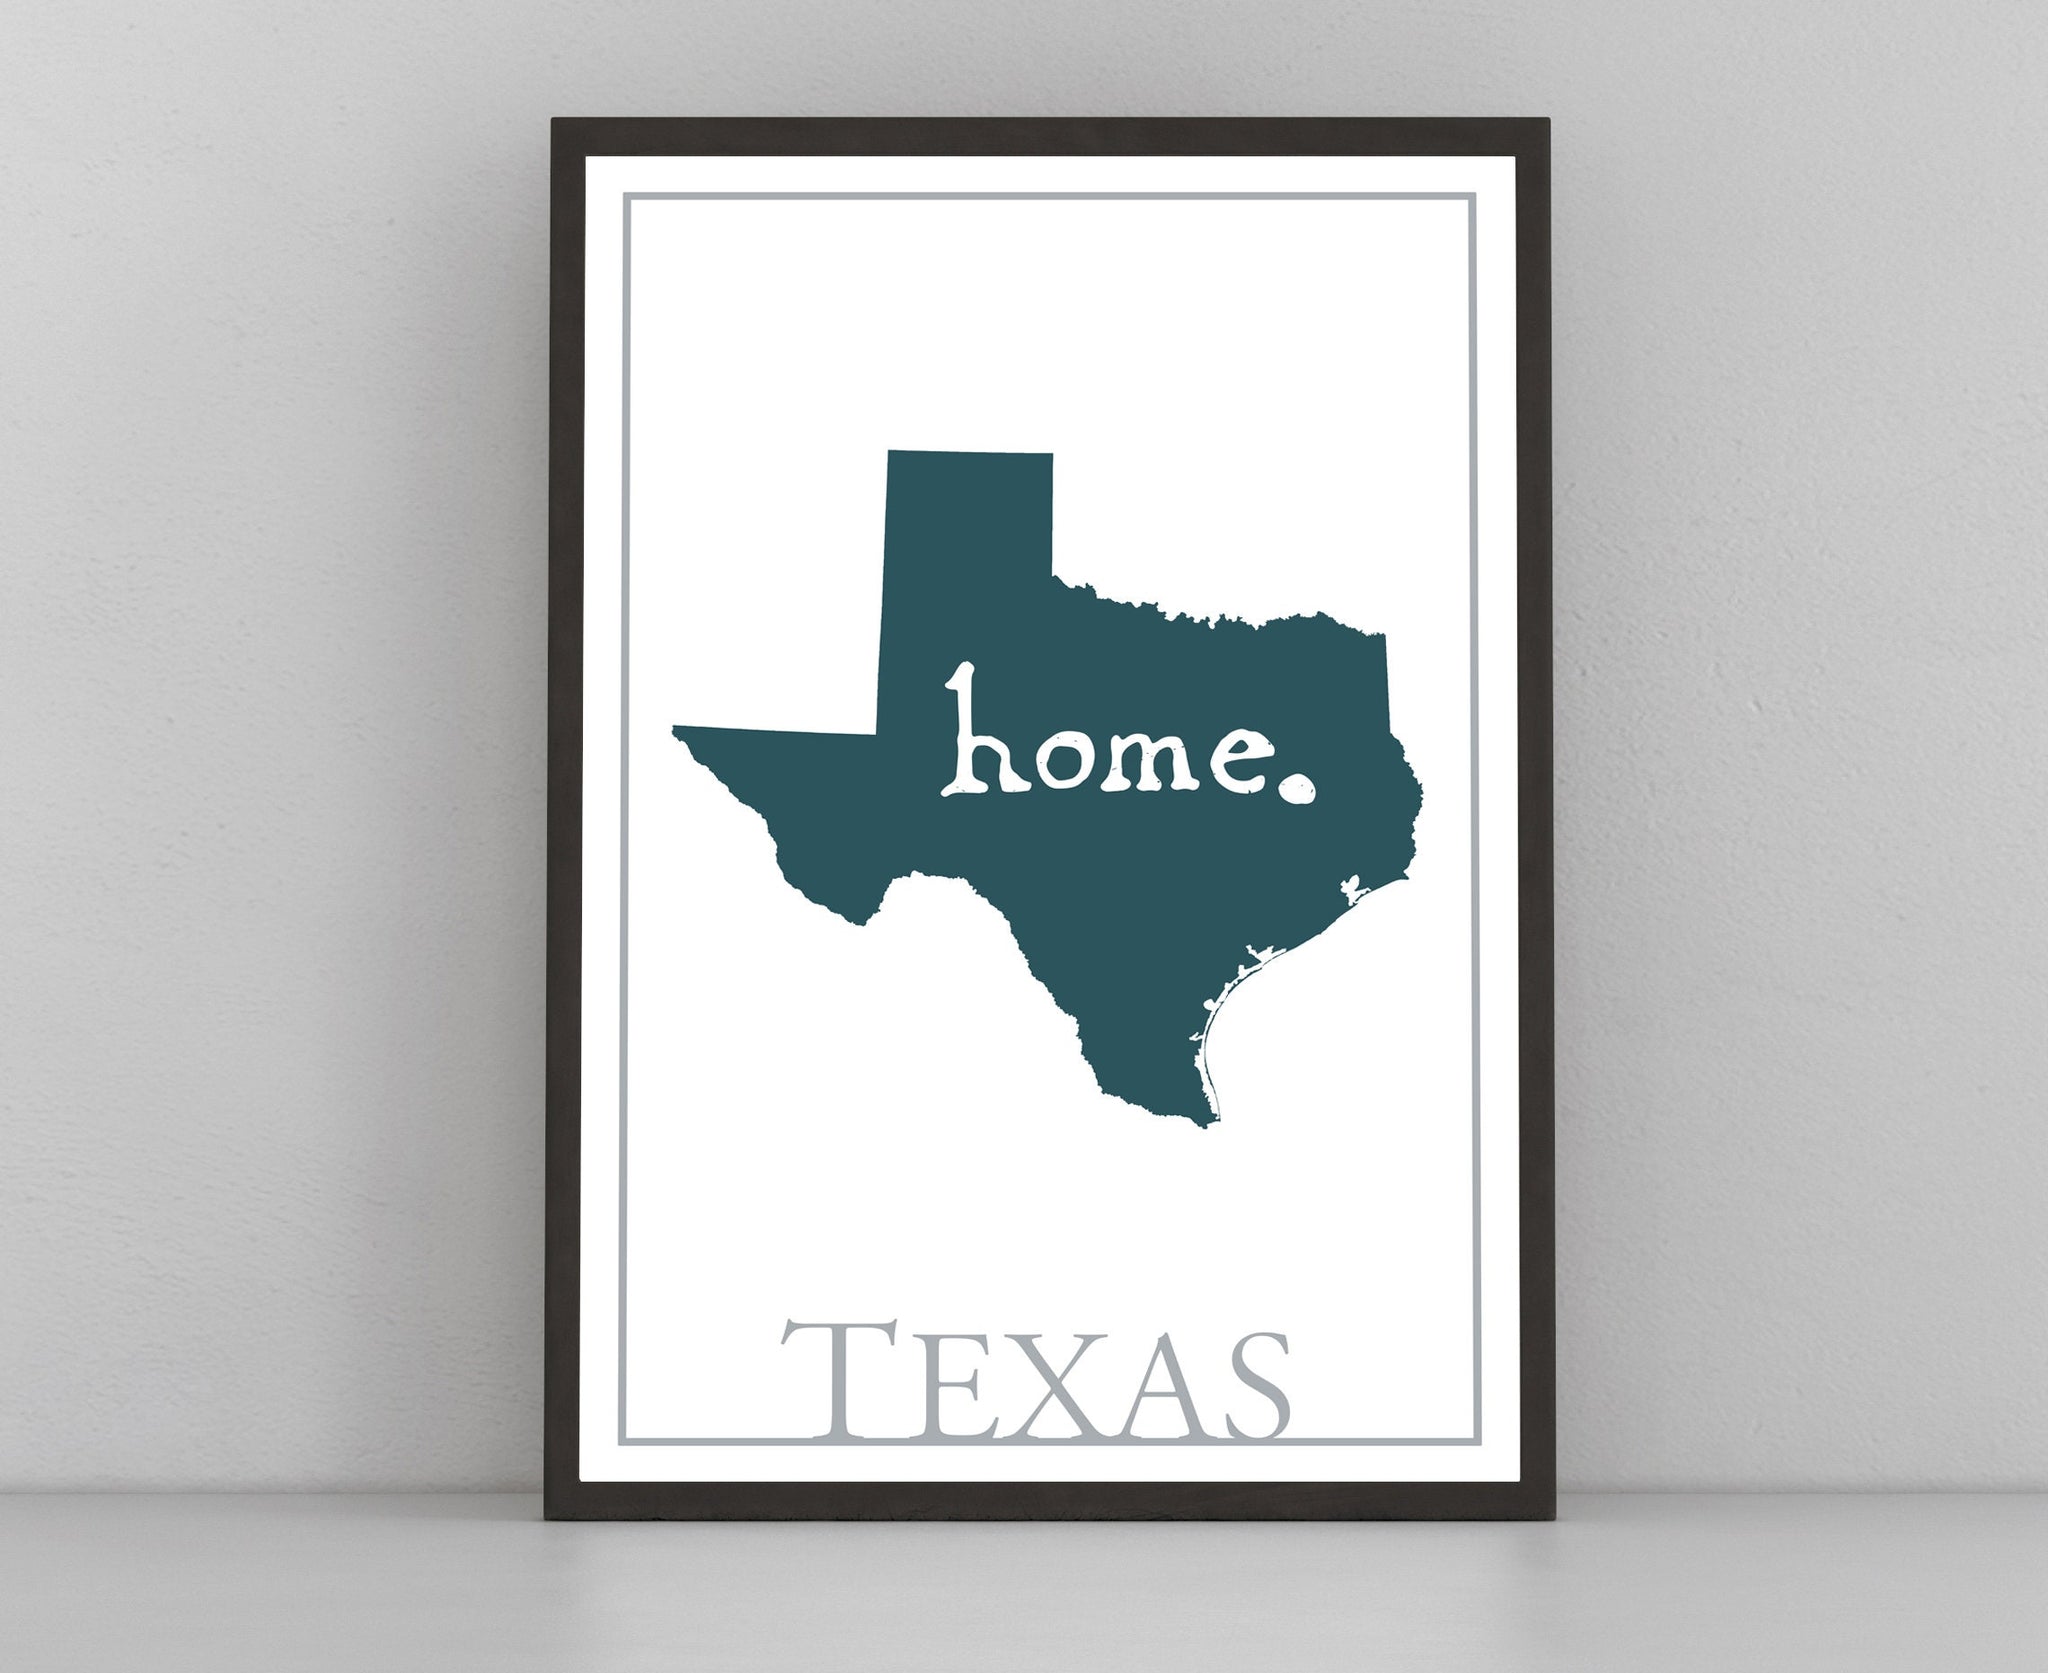 Texas Map Wall Art, Texas Modern Map Poster Print, City map wall decor, Texas City Poster Print, Texas State Poster, Home wall decor, Gifts